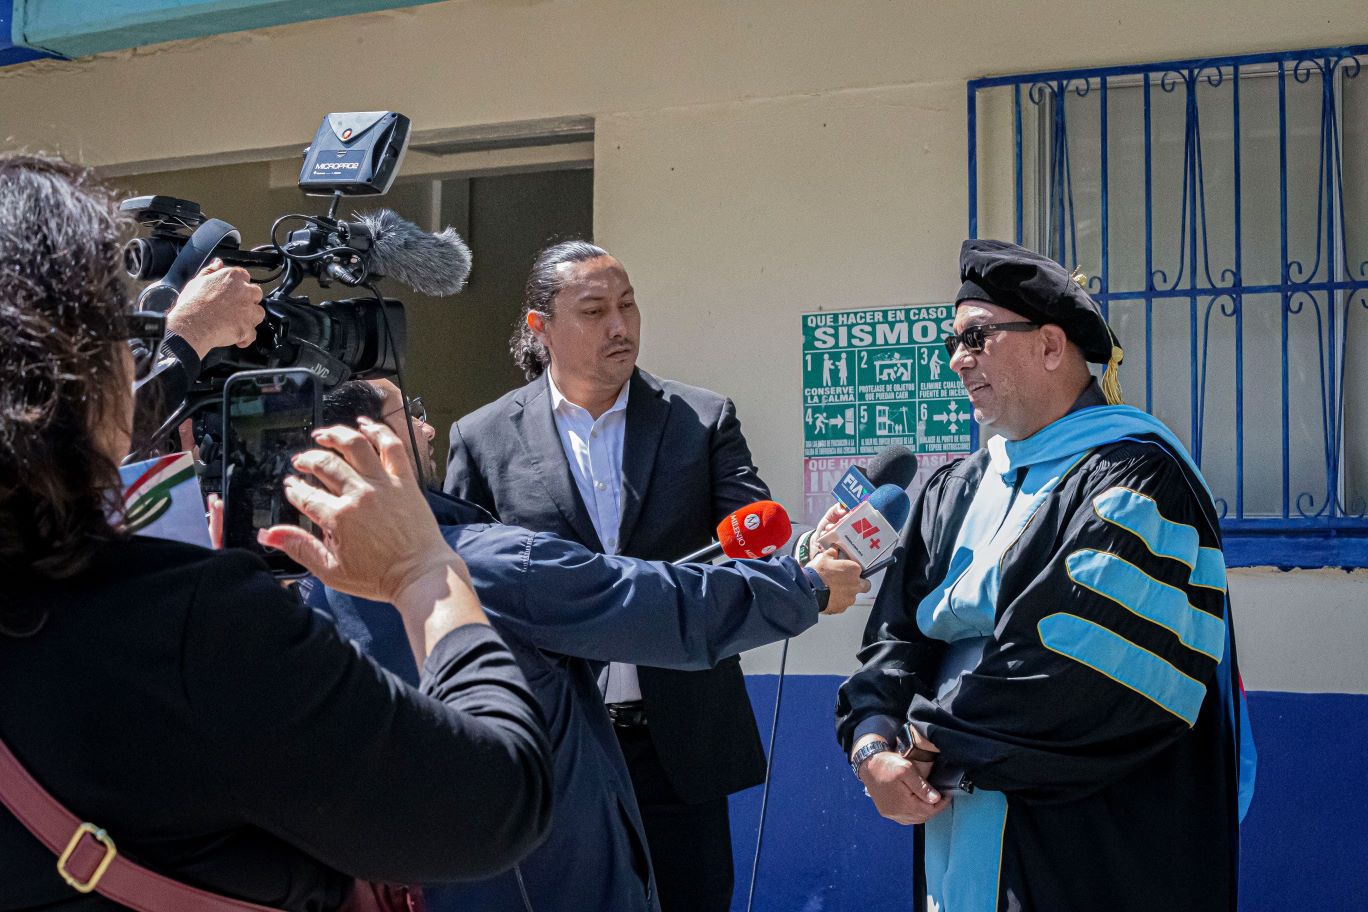 Dr. Mark Sanchez, SWC President, giving interviews at the first Binational/Fronterizo Commencement Ceremony in Tijuana in June 2023.